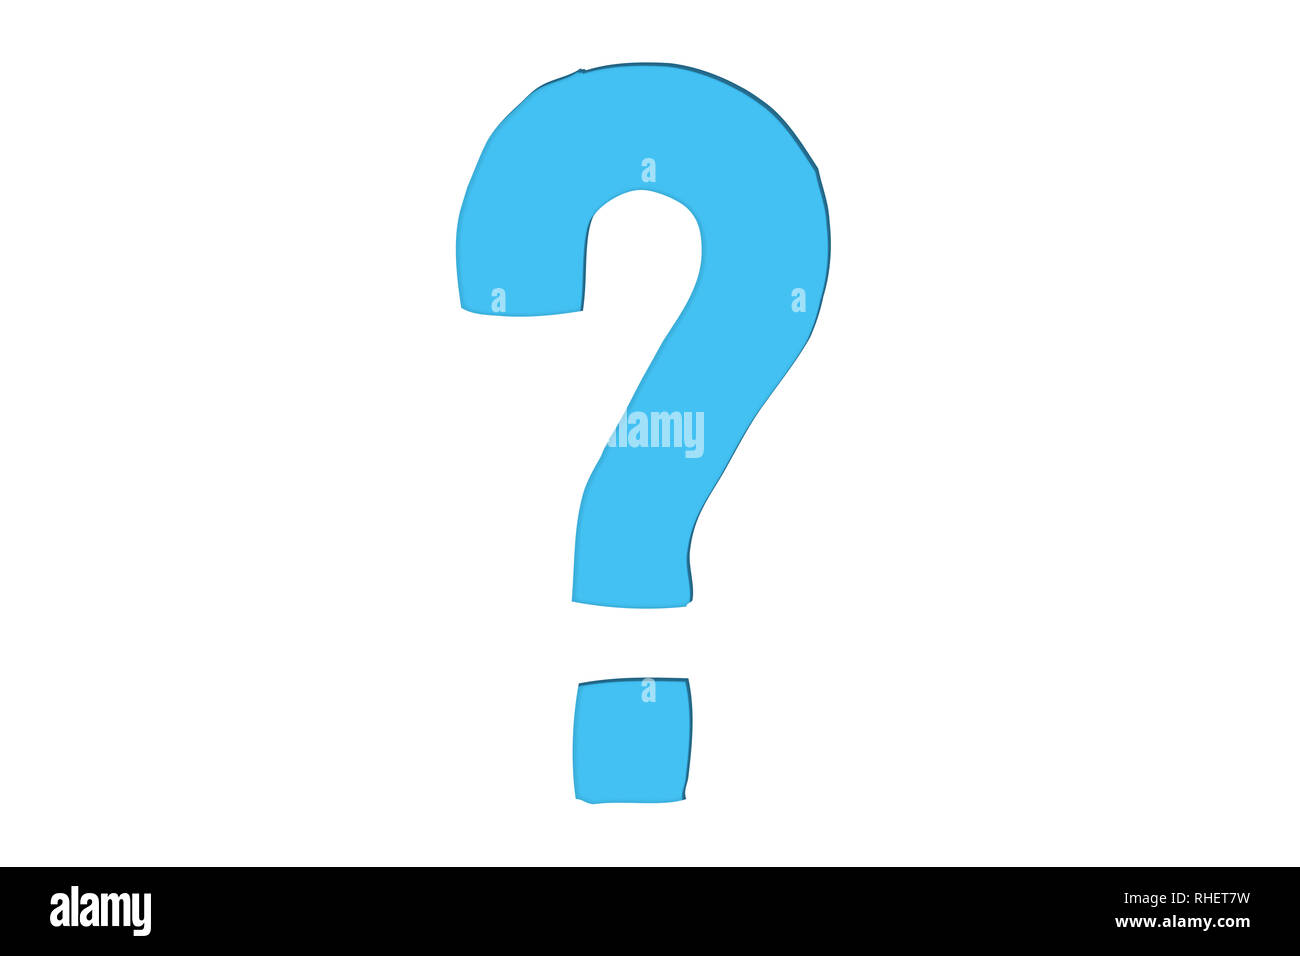 Question mark sign symbol in minimalist design as light blue colour cut out  isolated on white background. Concept for FAQ (Frequently Asked Questions  Stock Photo - Alamy